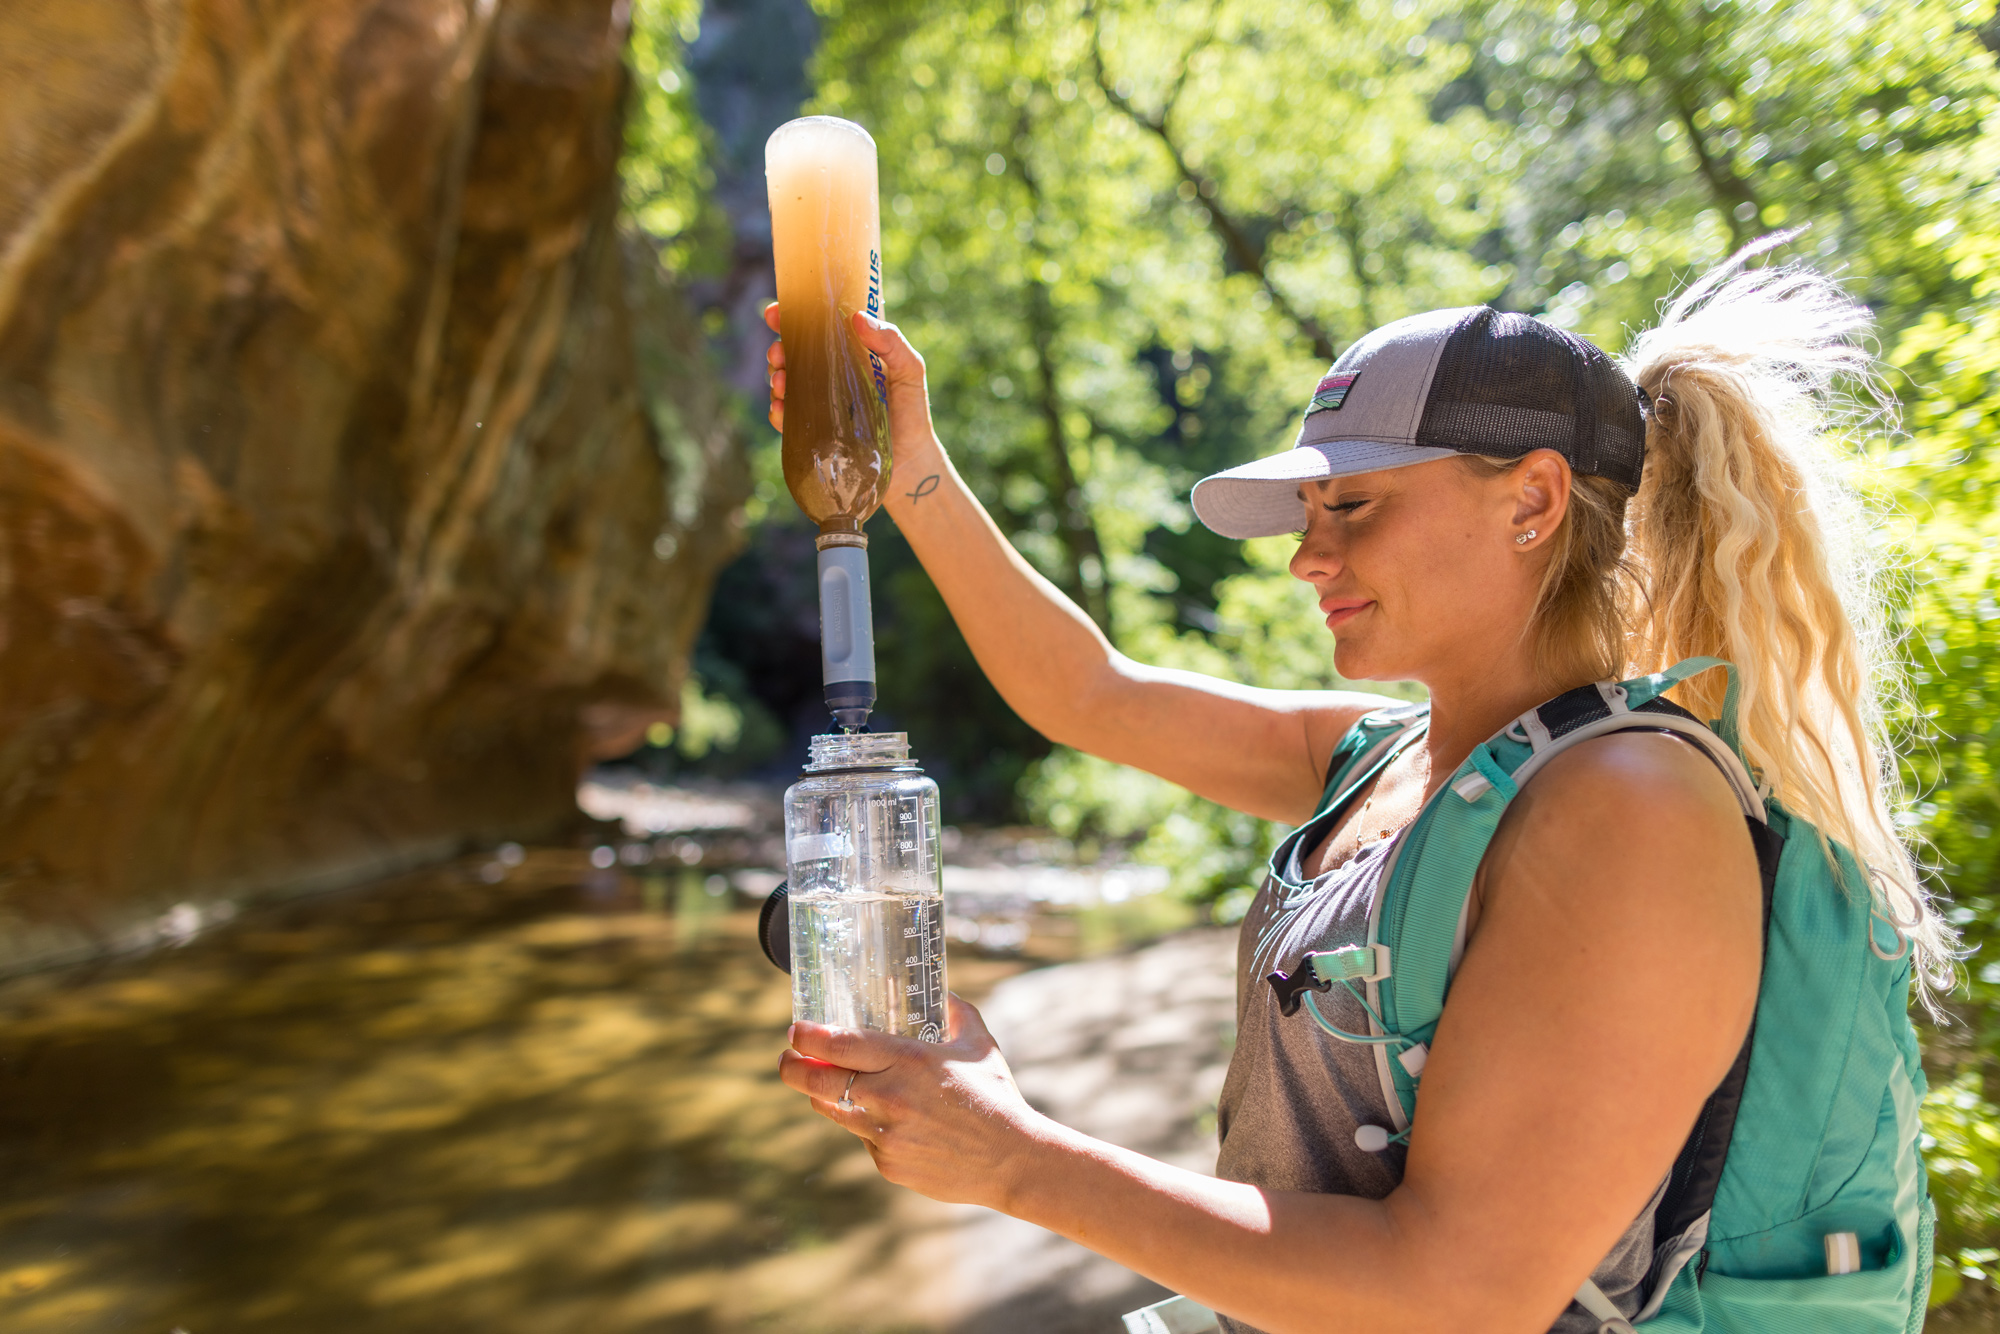 The LifeStraw Peak Solo is a tiny water filter for camping and